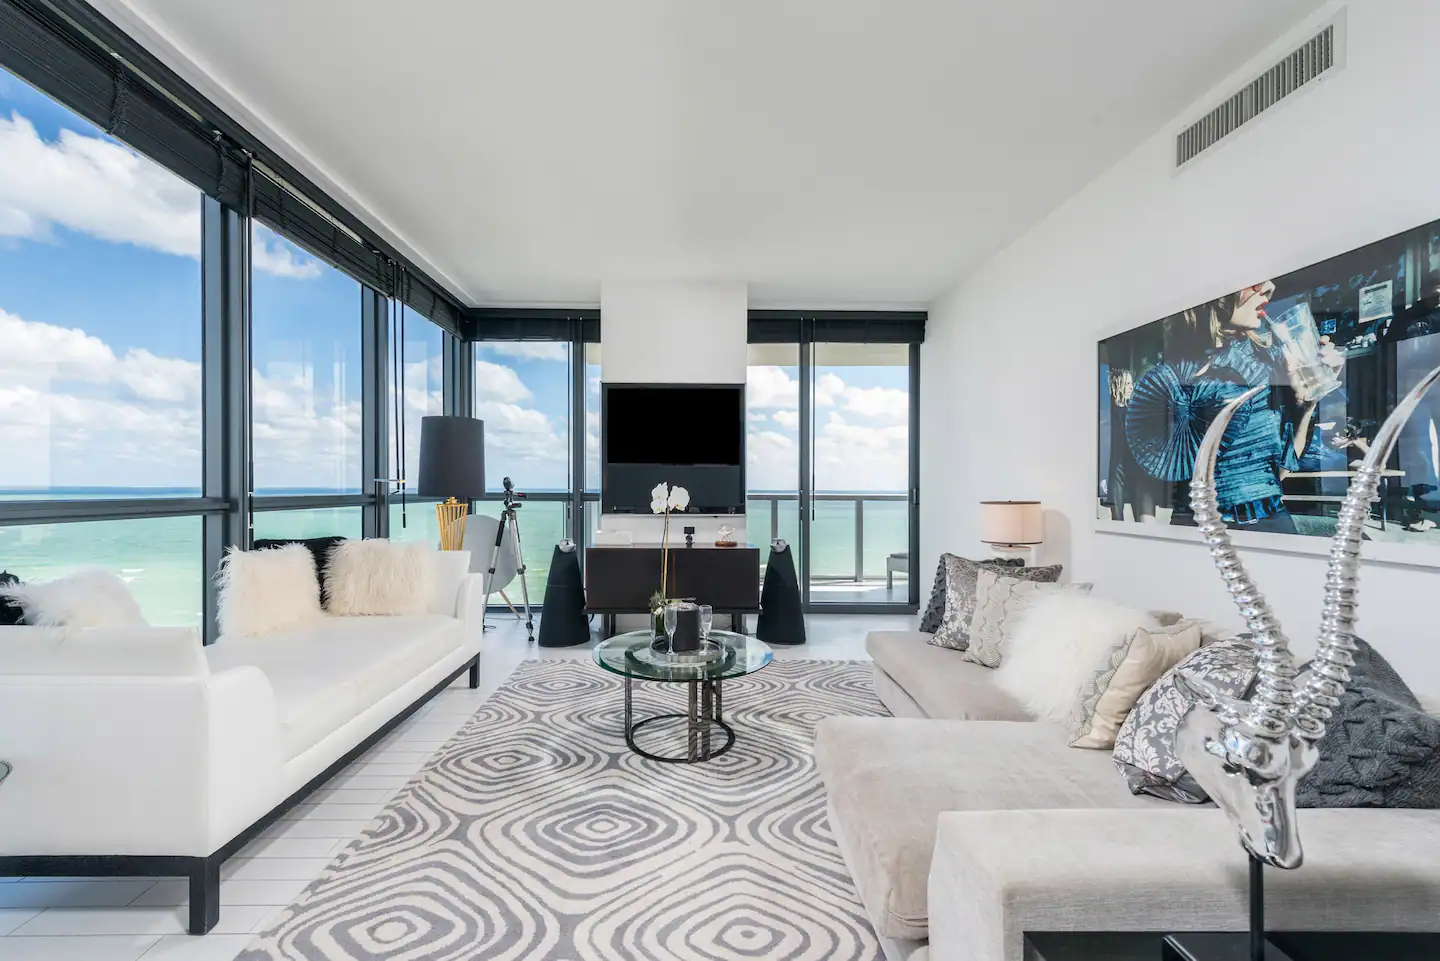 Enjoy the views from the 12th floor in a great room that faces northeast, following the curve of the beach around the bay.